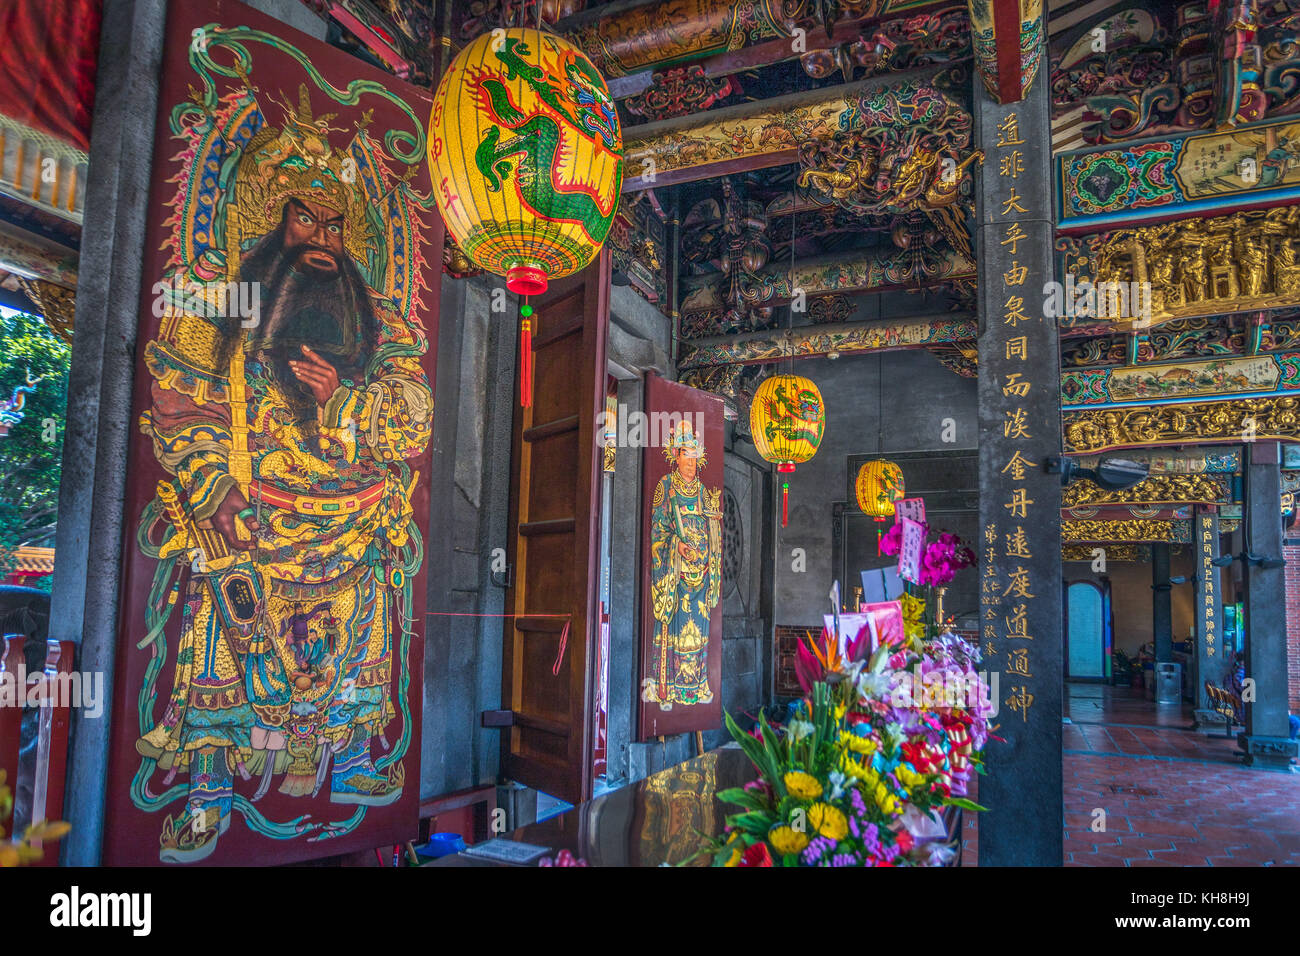 Taiwan, Taipei City, Bao´an temple *** Local Caption *** architecture, art, Bao´an, chinese, colorful, decoration, detail, gate, Interior, no people,  Stock Photo